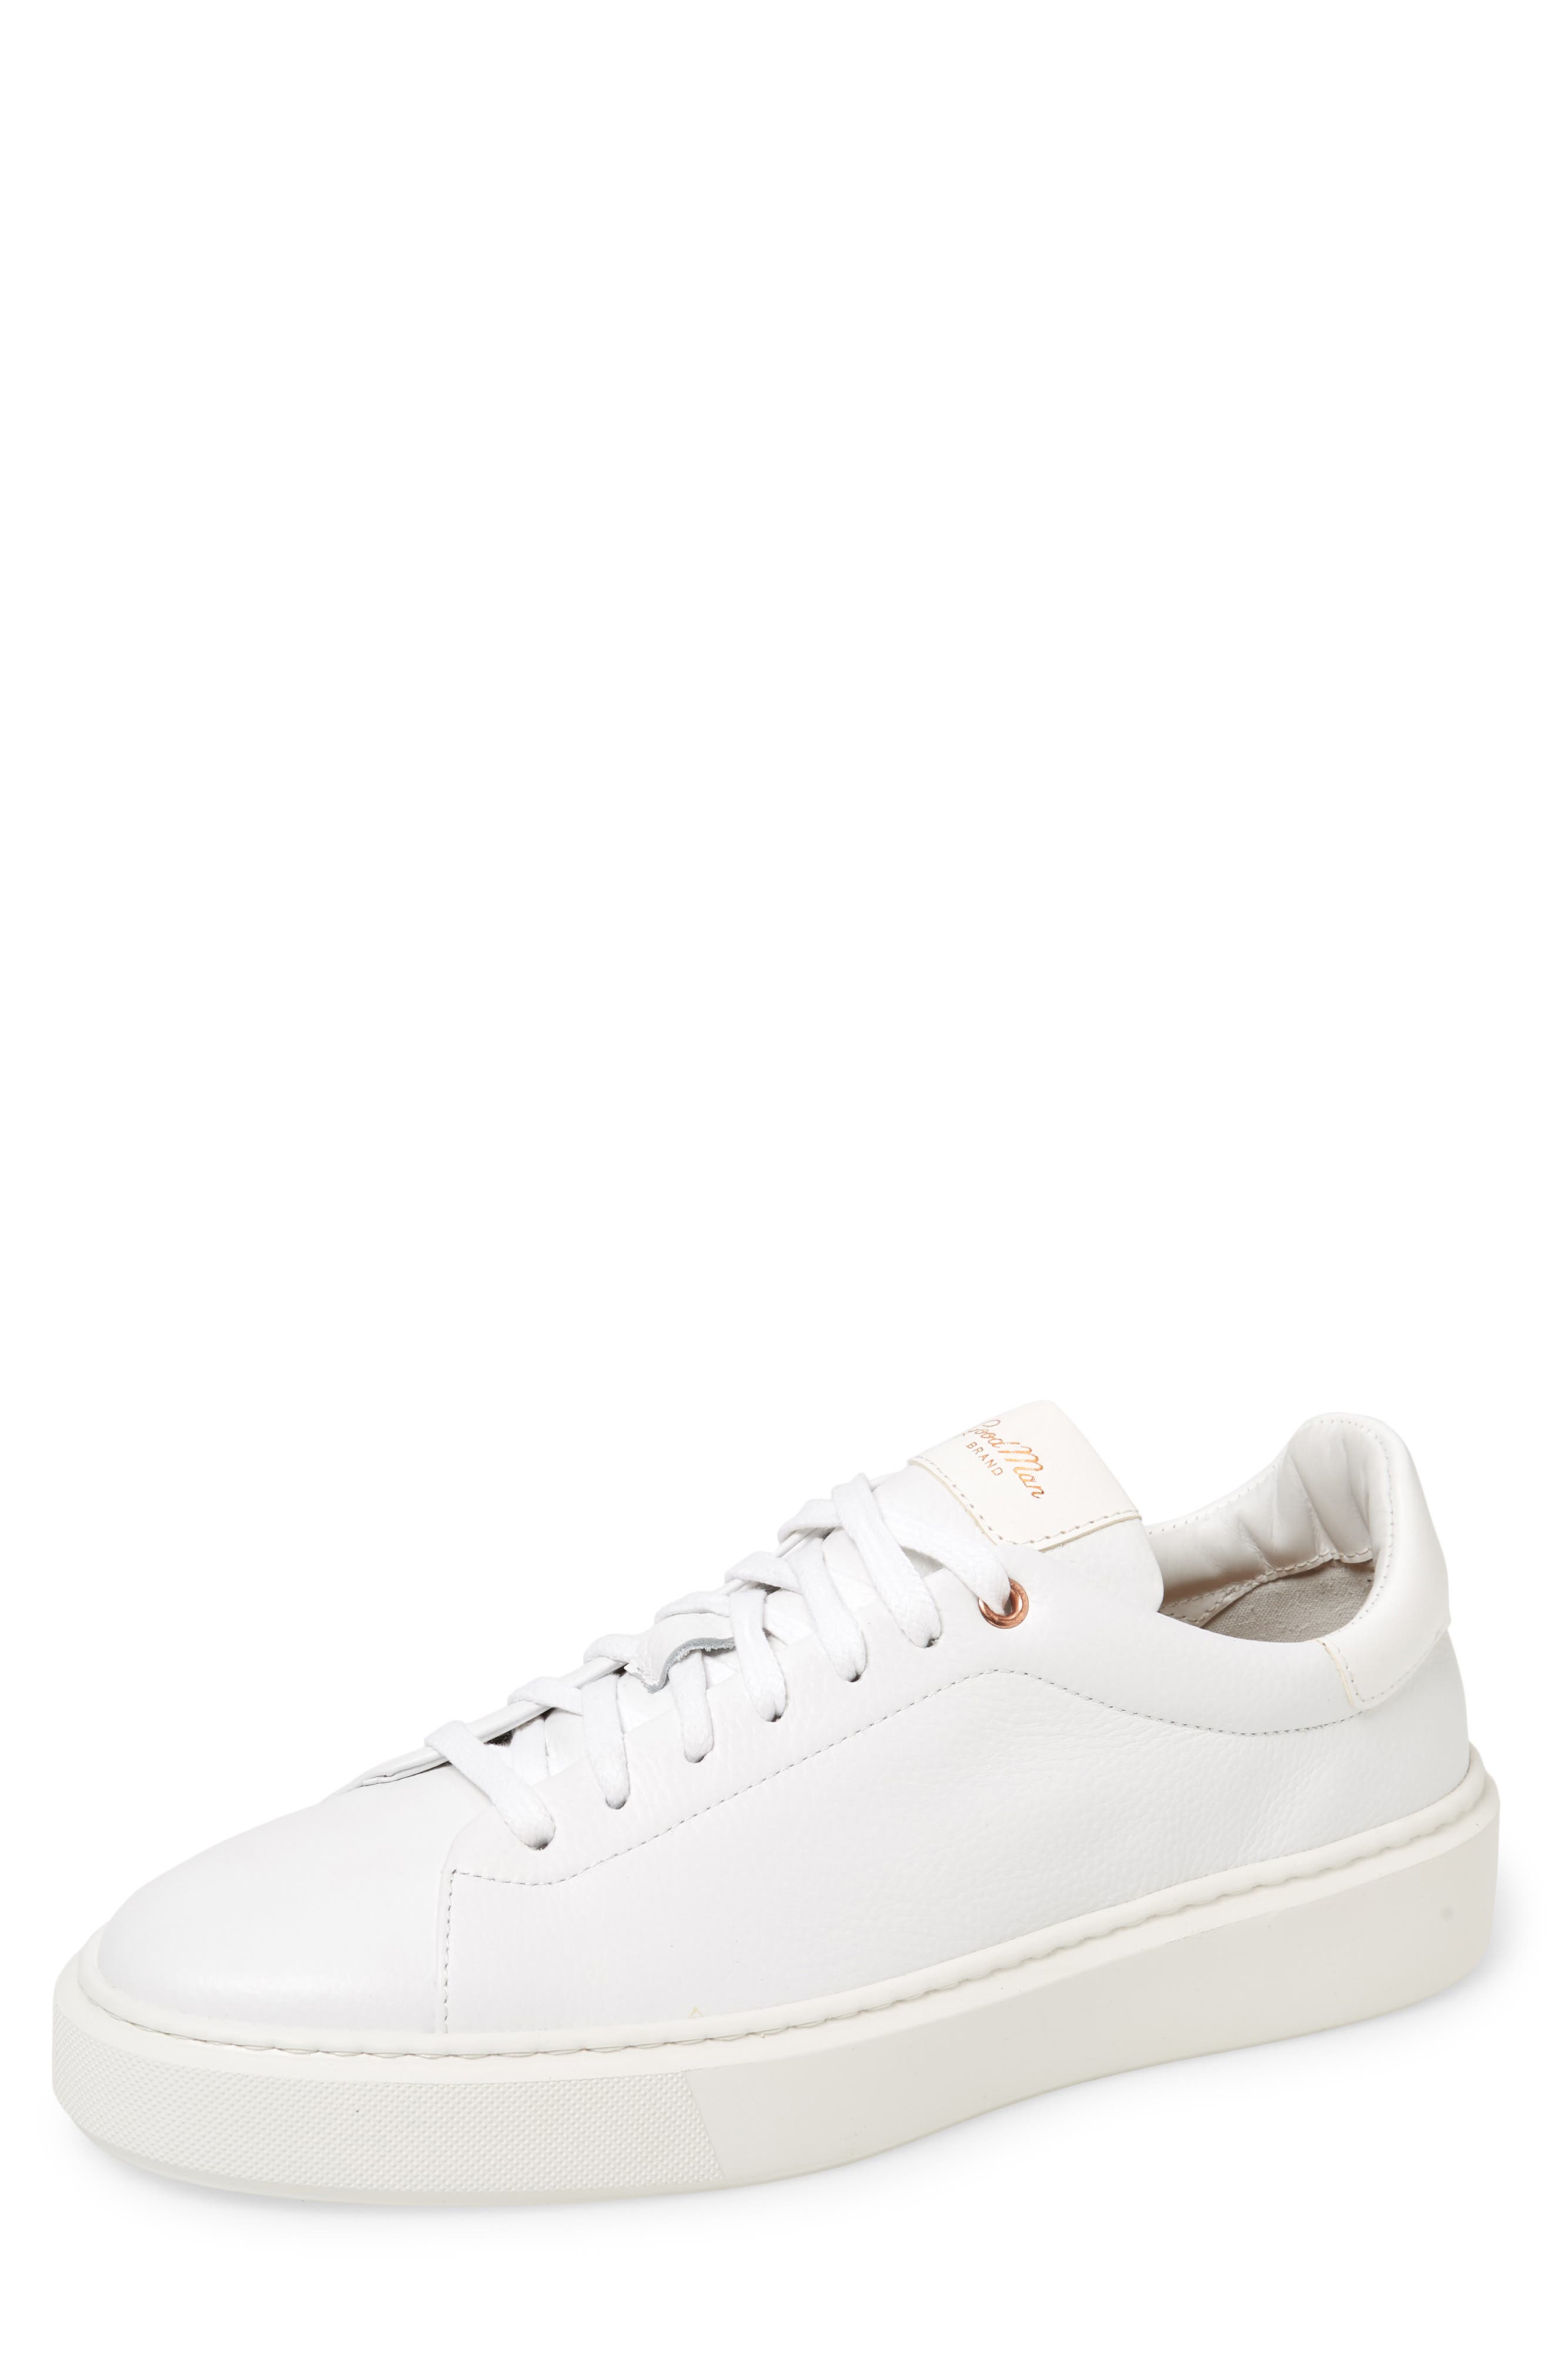 all white athletic shoes mens